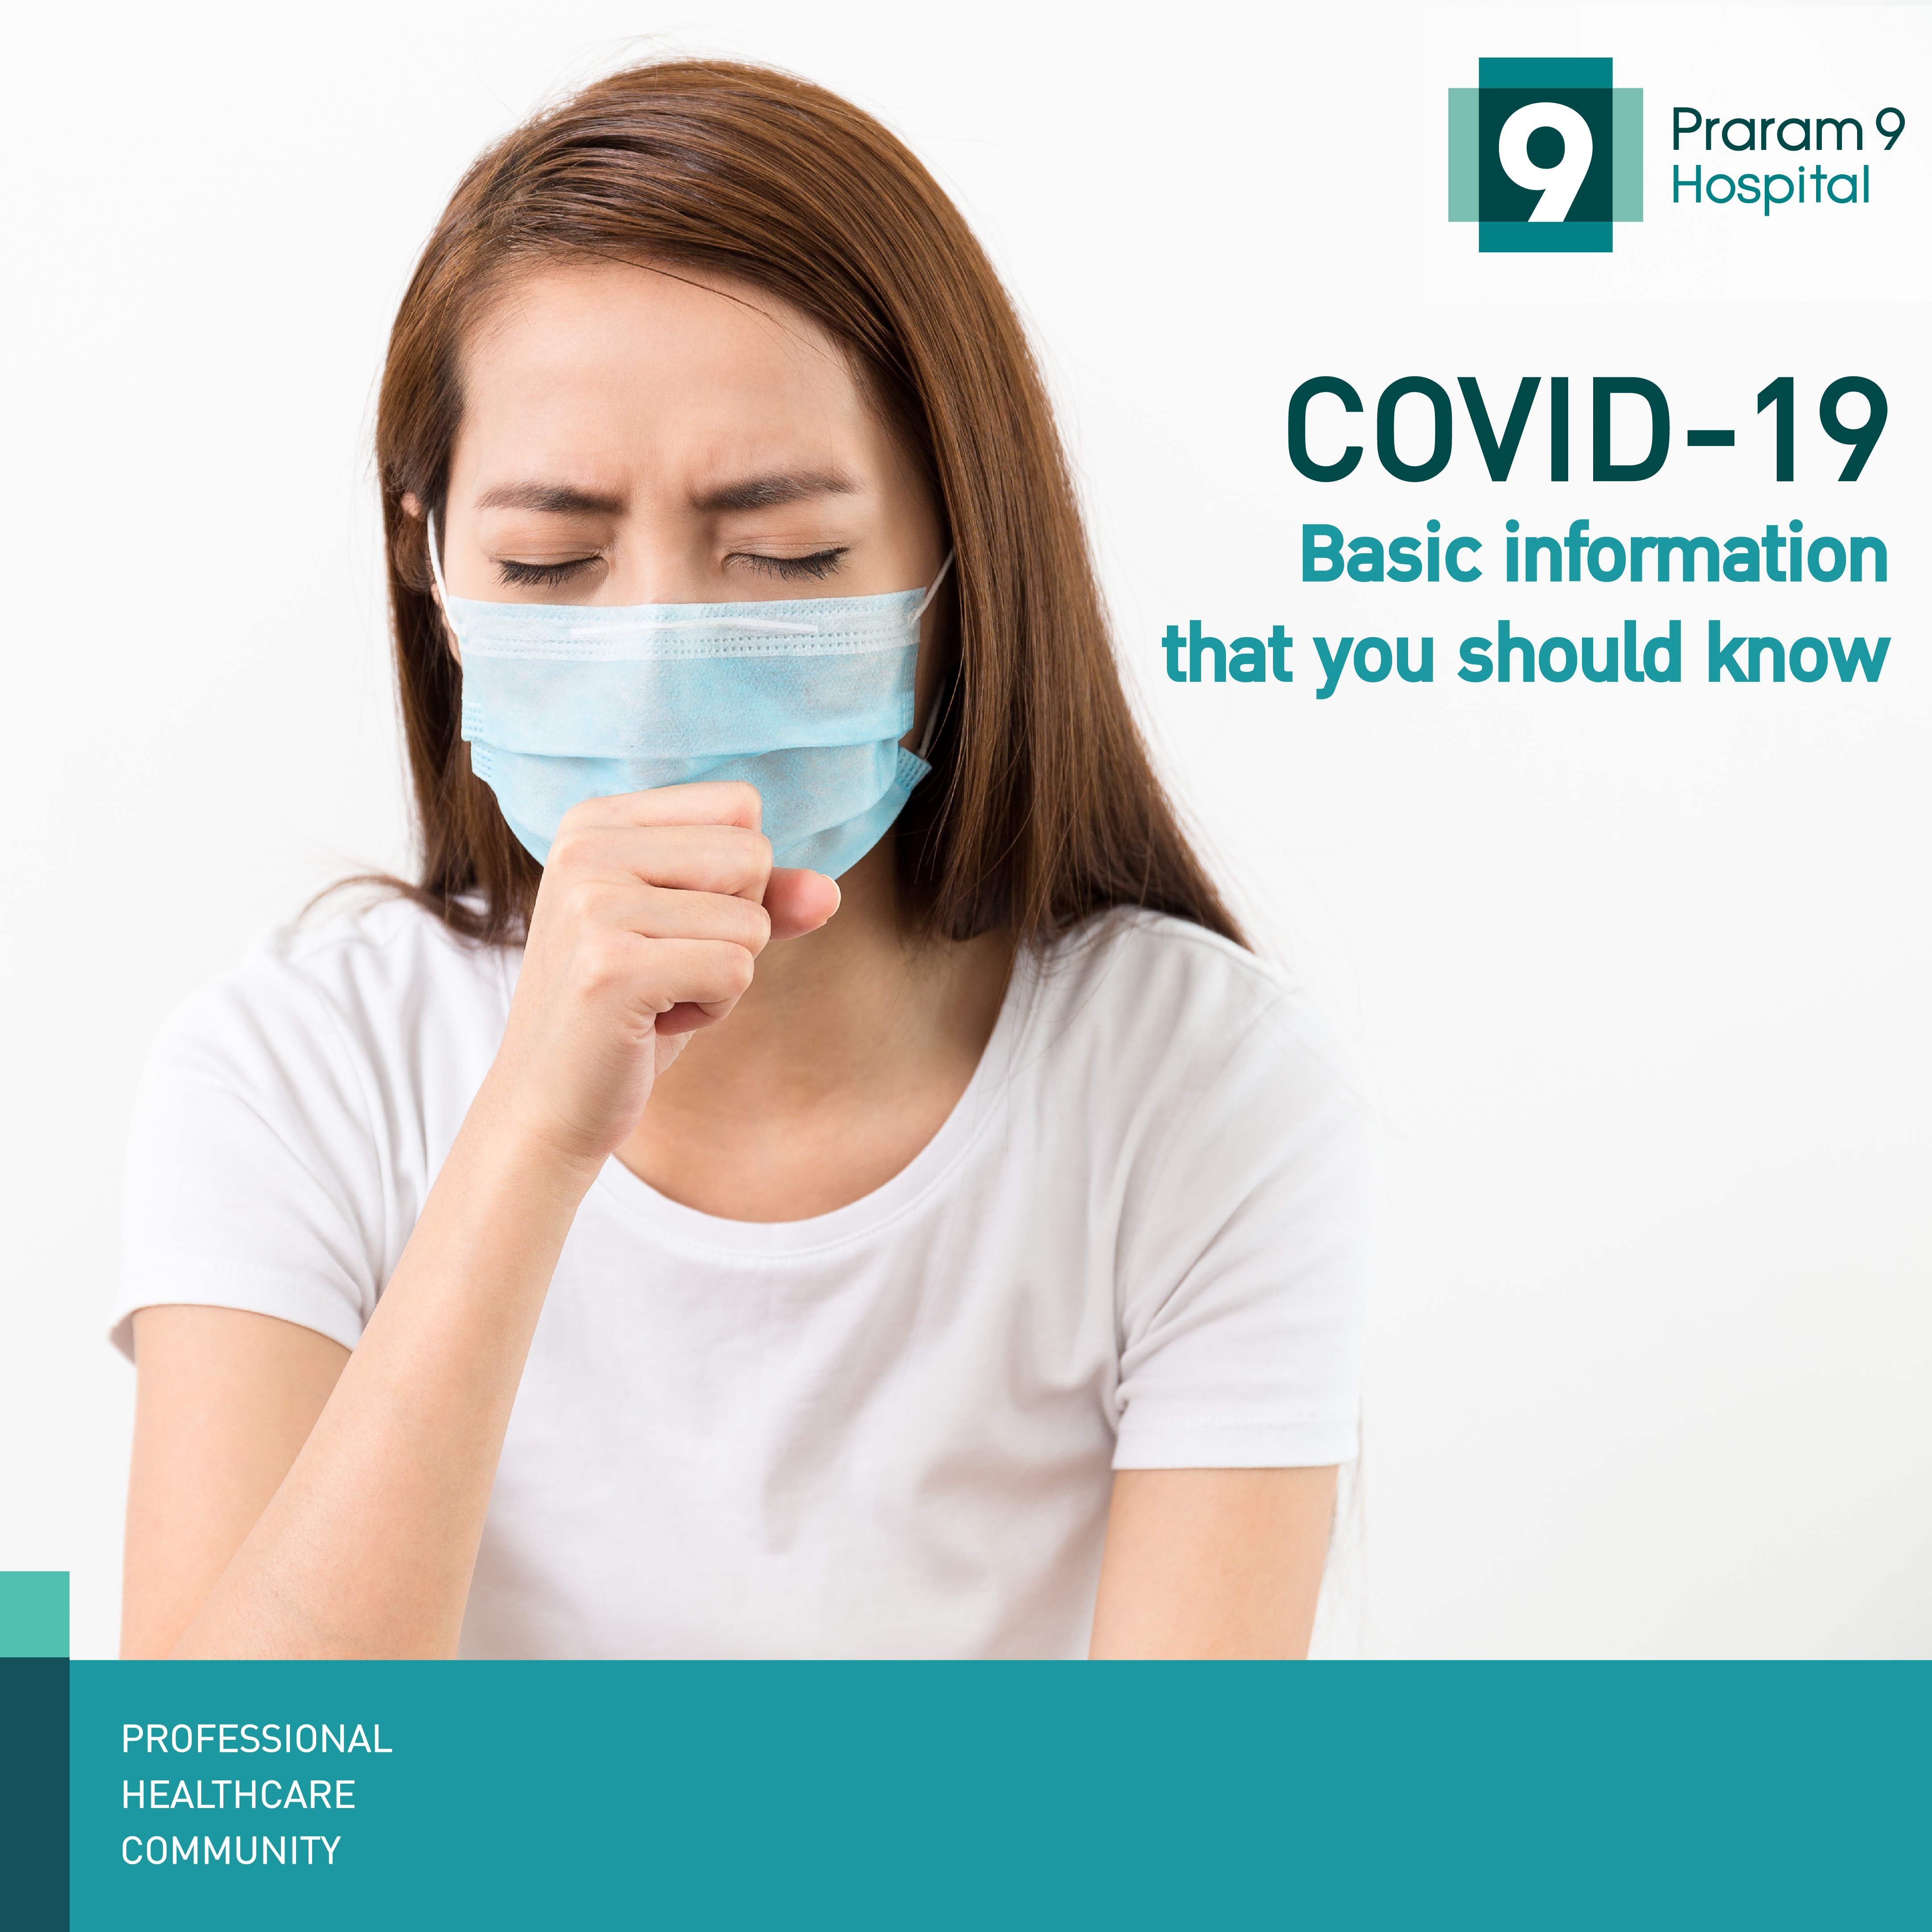 Basic information about Coronavirus (COVID-19) that you should know